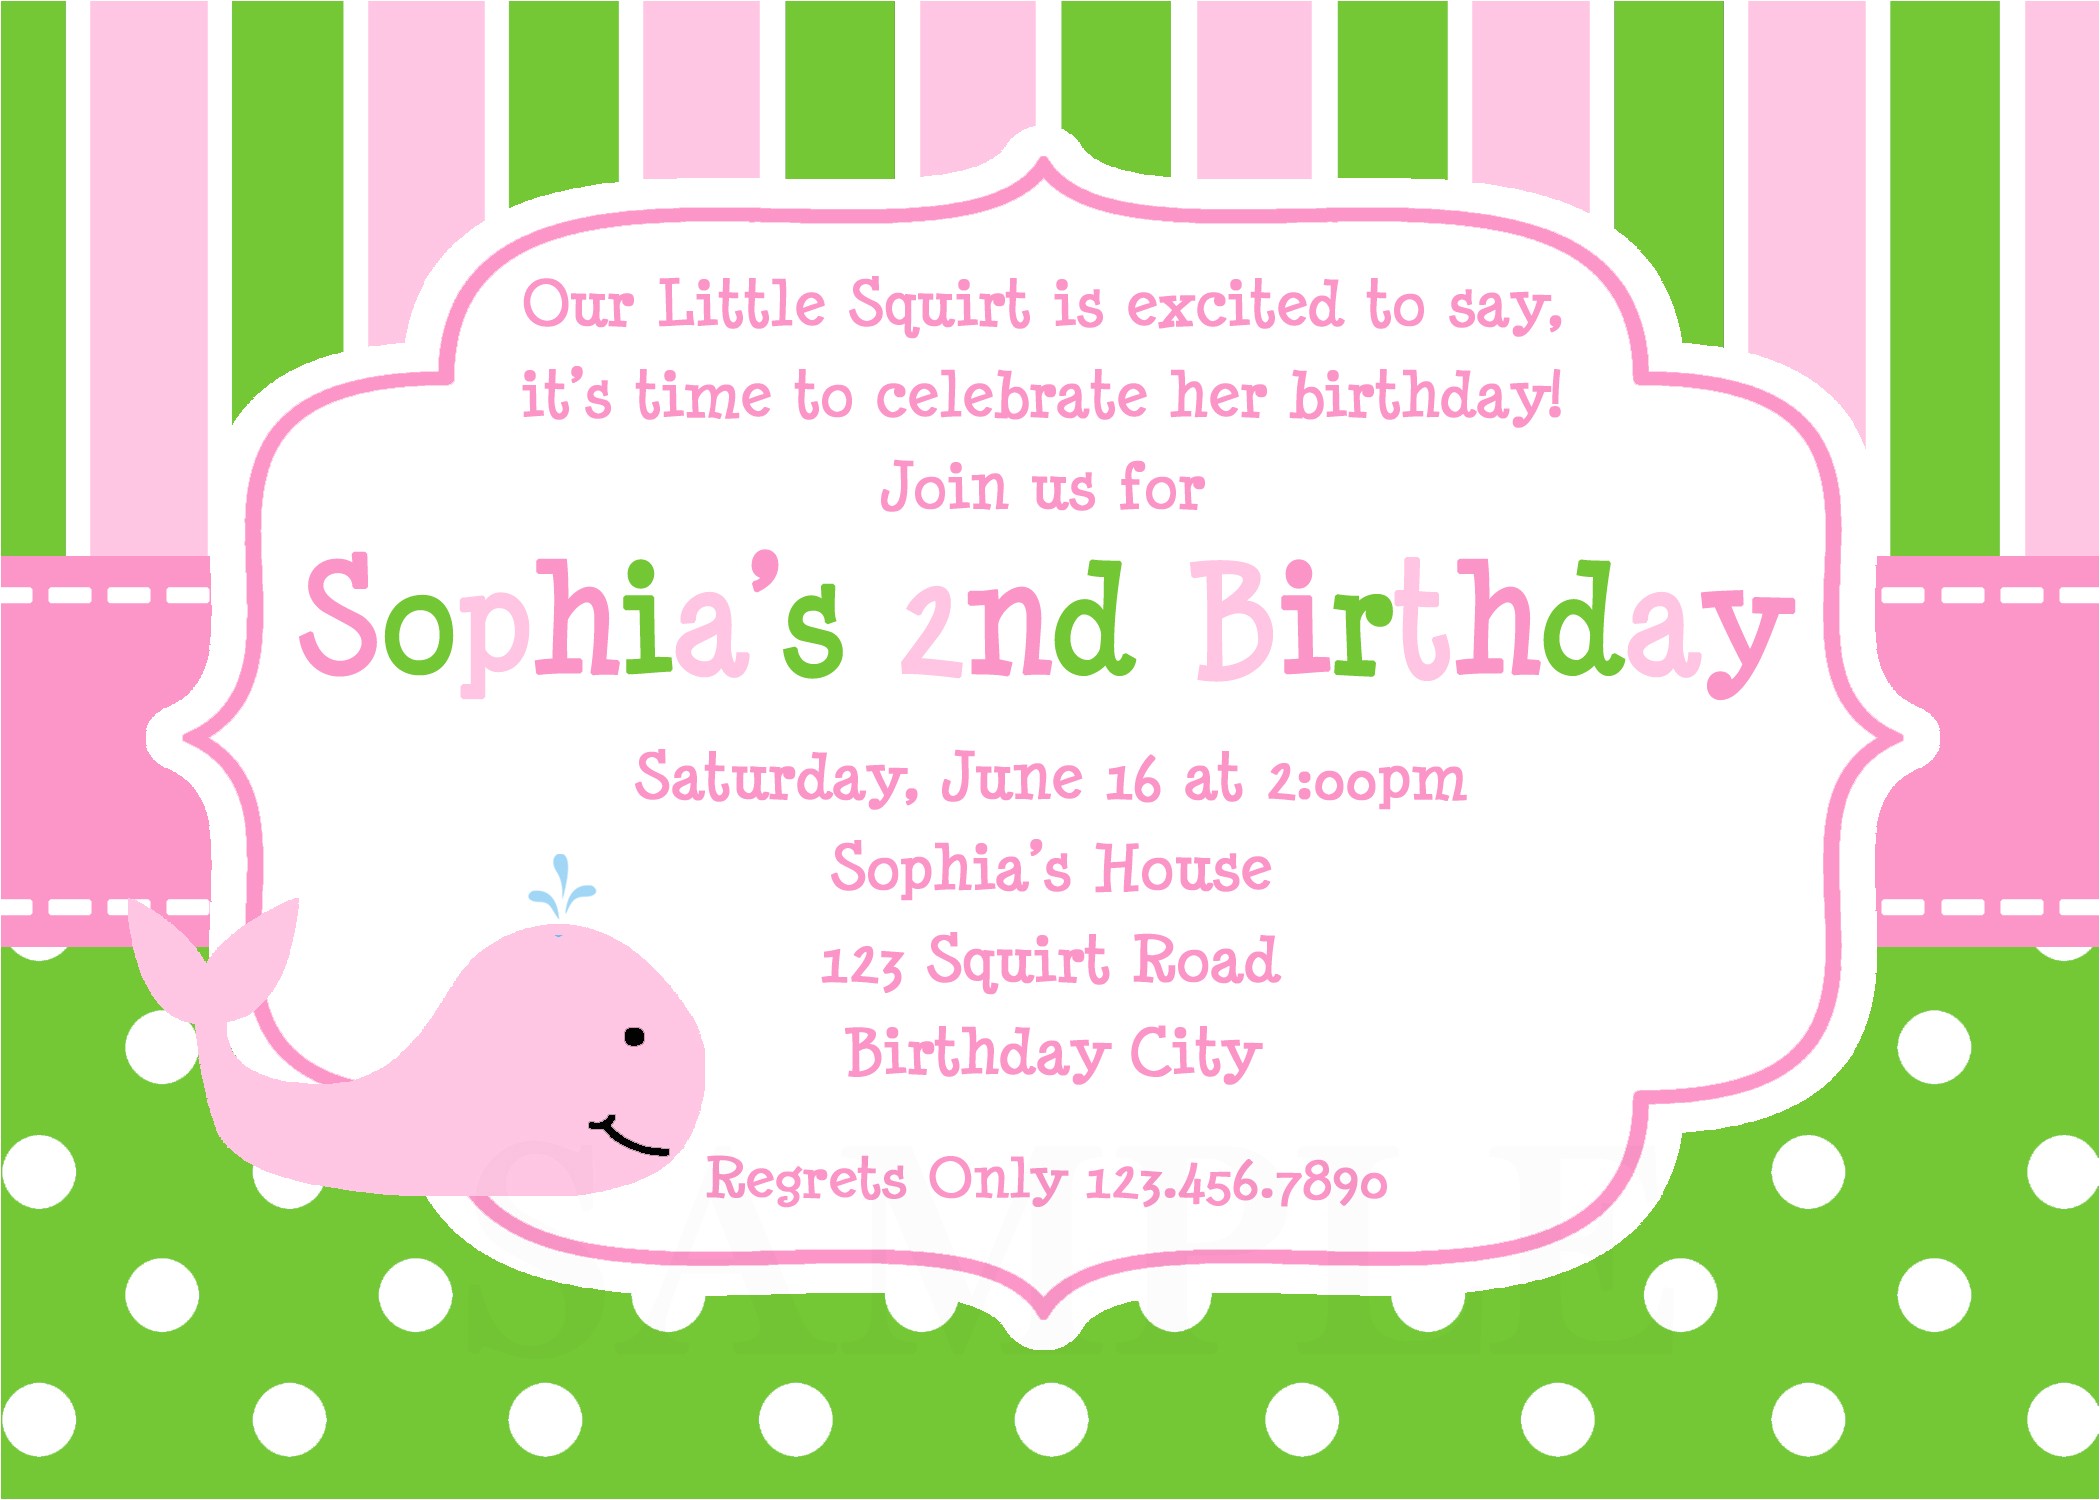 Picture Invitations for Birthday How to Design Birthday Invitations Drevio Invitations Design